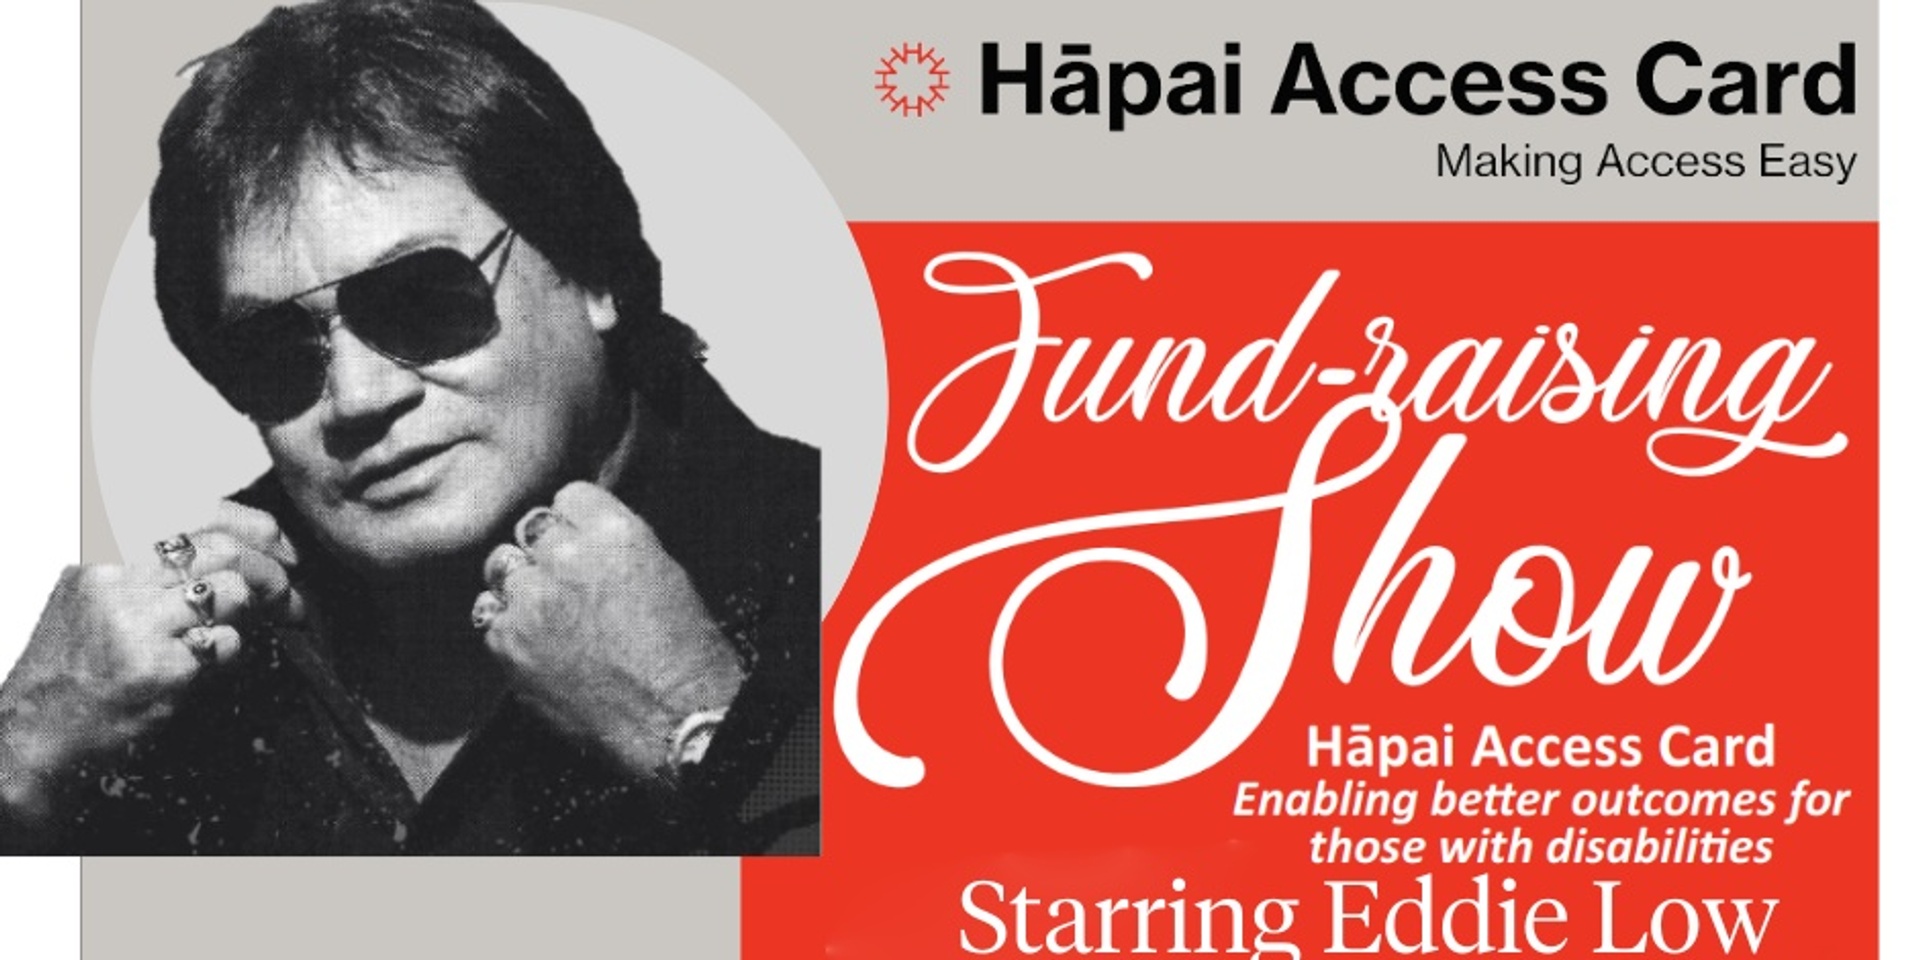 Hapai Access Card Fundraising Show starring Eddie Low